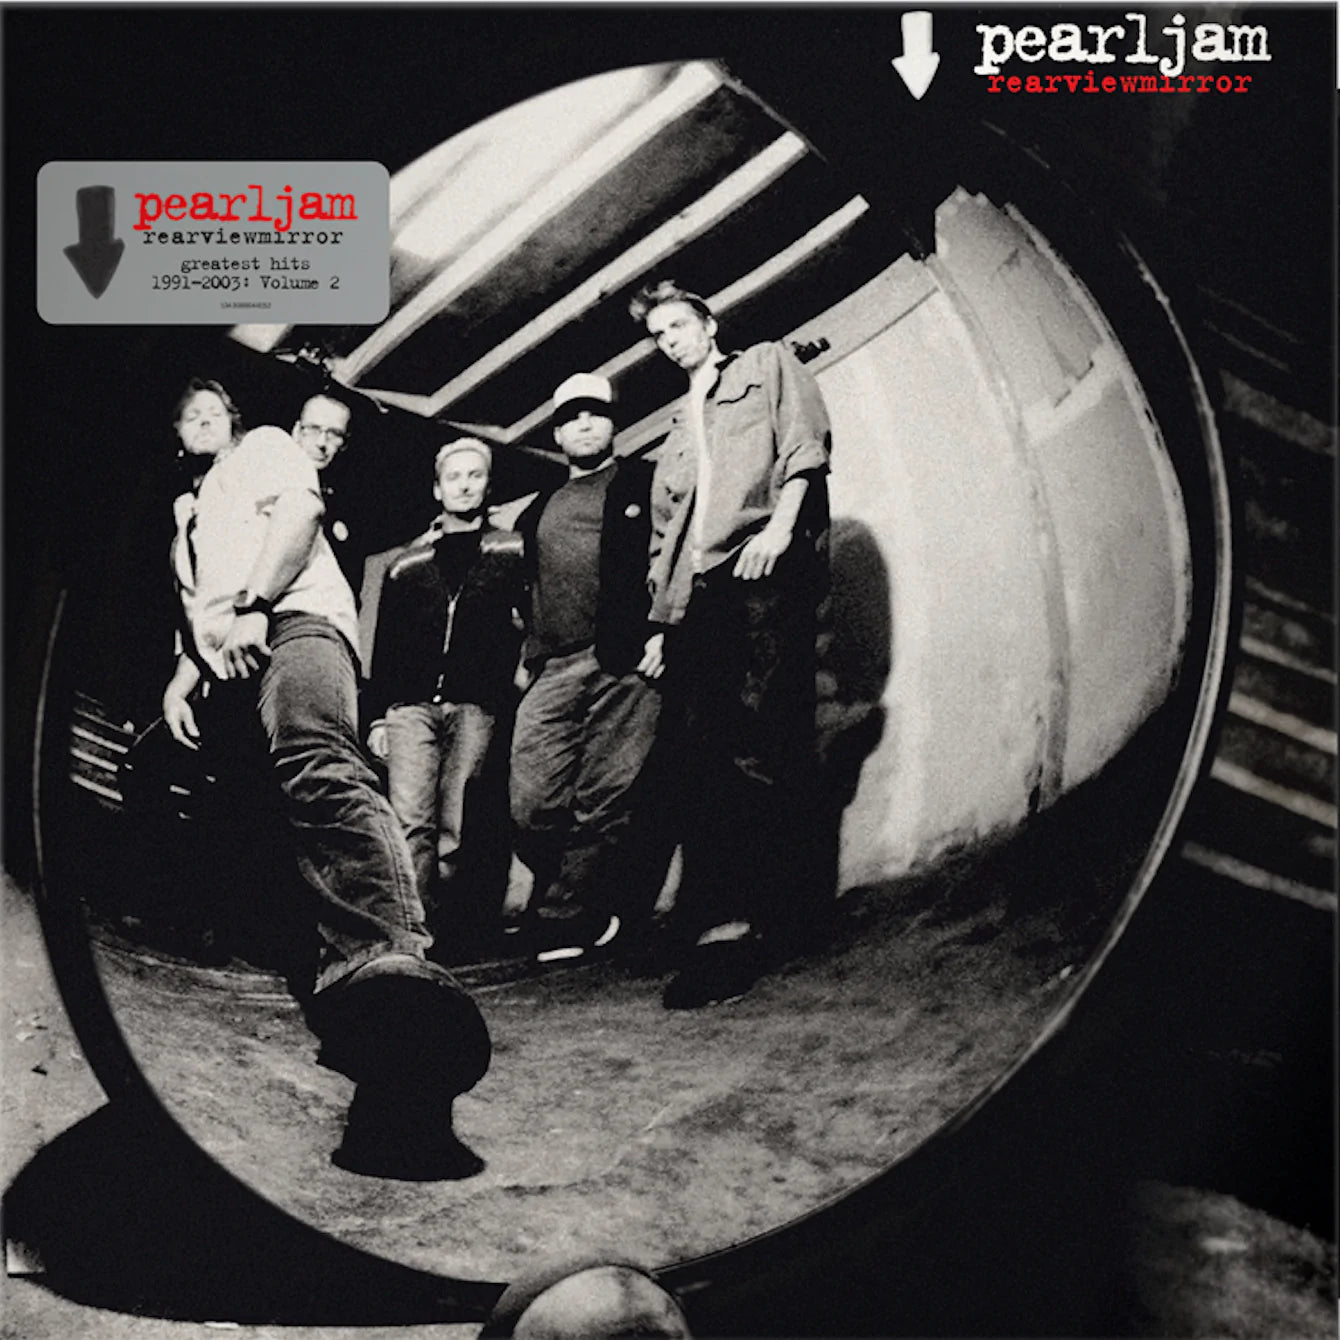 Pearl Jam - rearviewmirror (Greatest Hits 1991-2003) Vol. 2-Epic-Mood